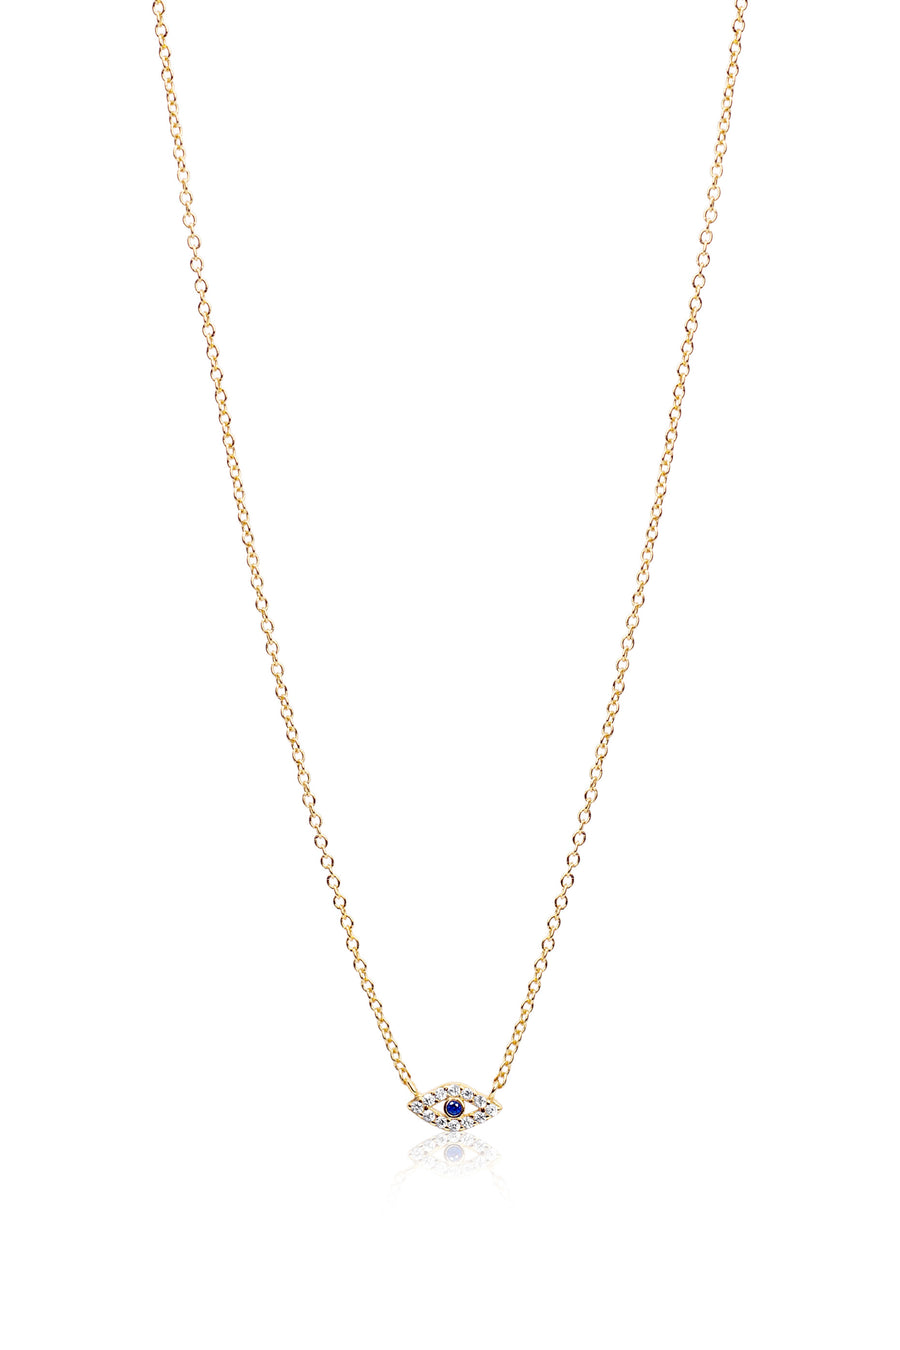 The Evil Eye Necklace - Gold